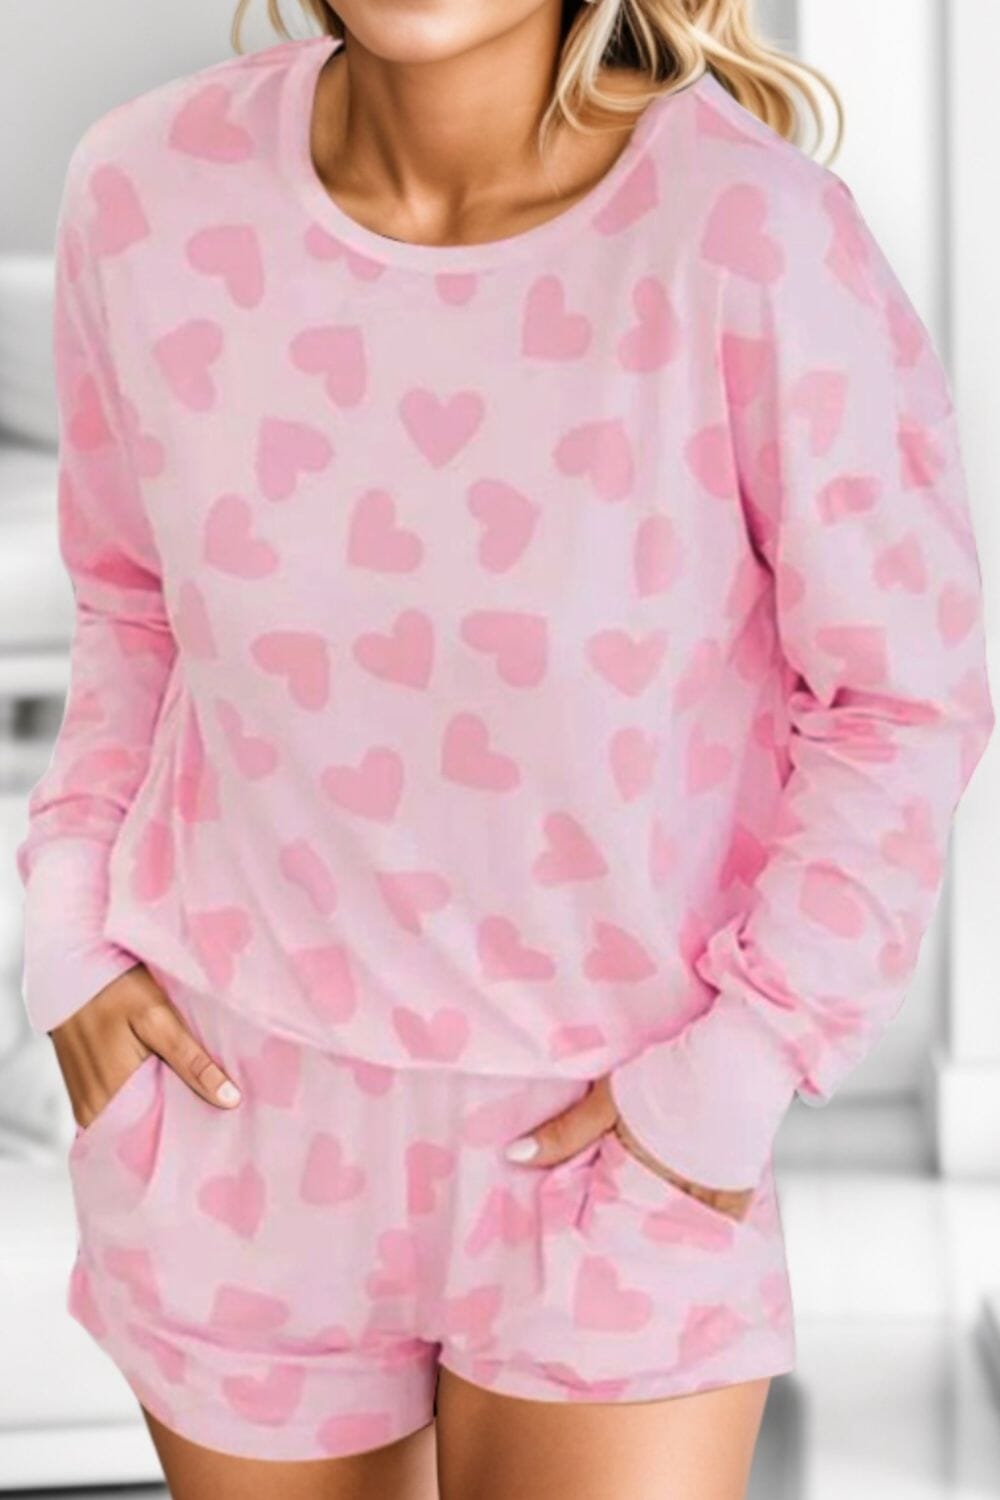 Heart Print Round Neck Top and Shorts Lounge Set - Sydney So Sweet